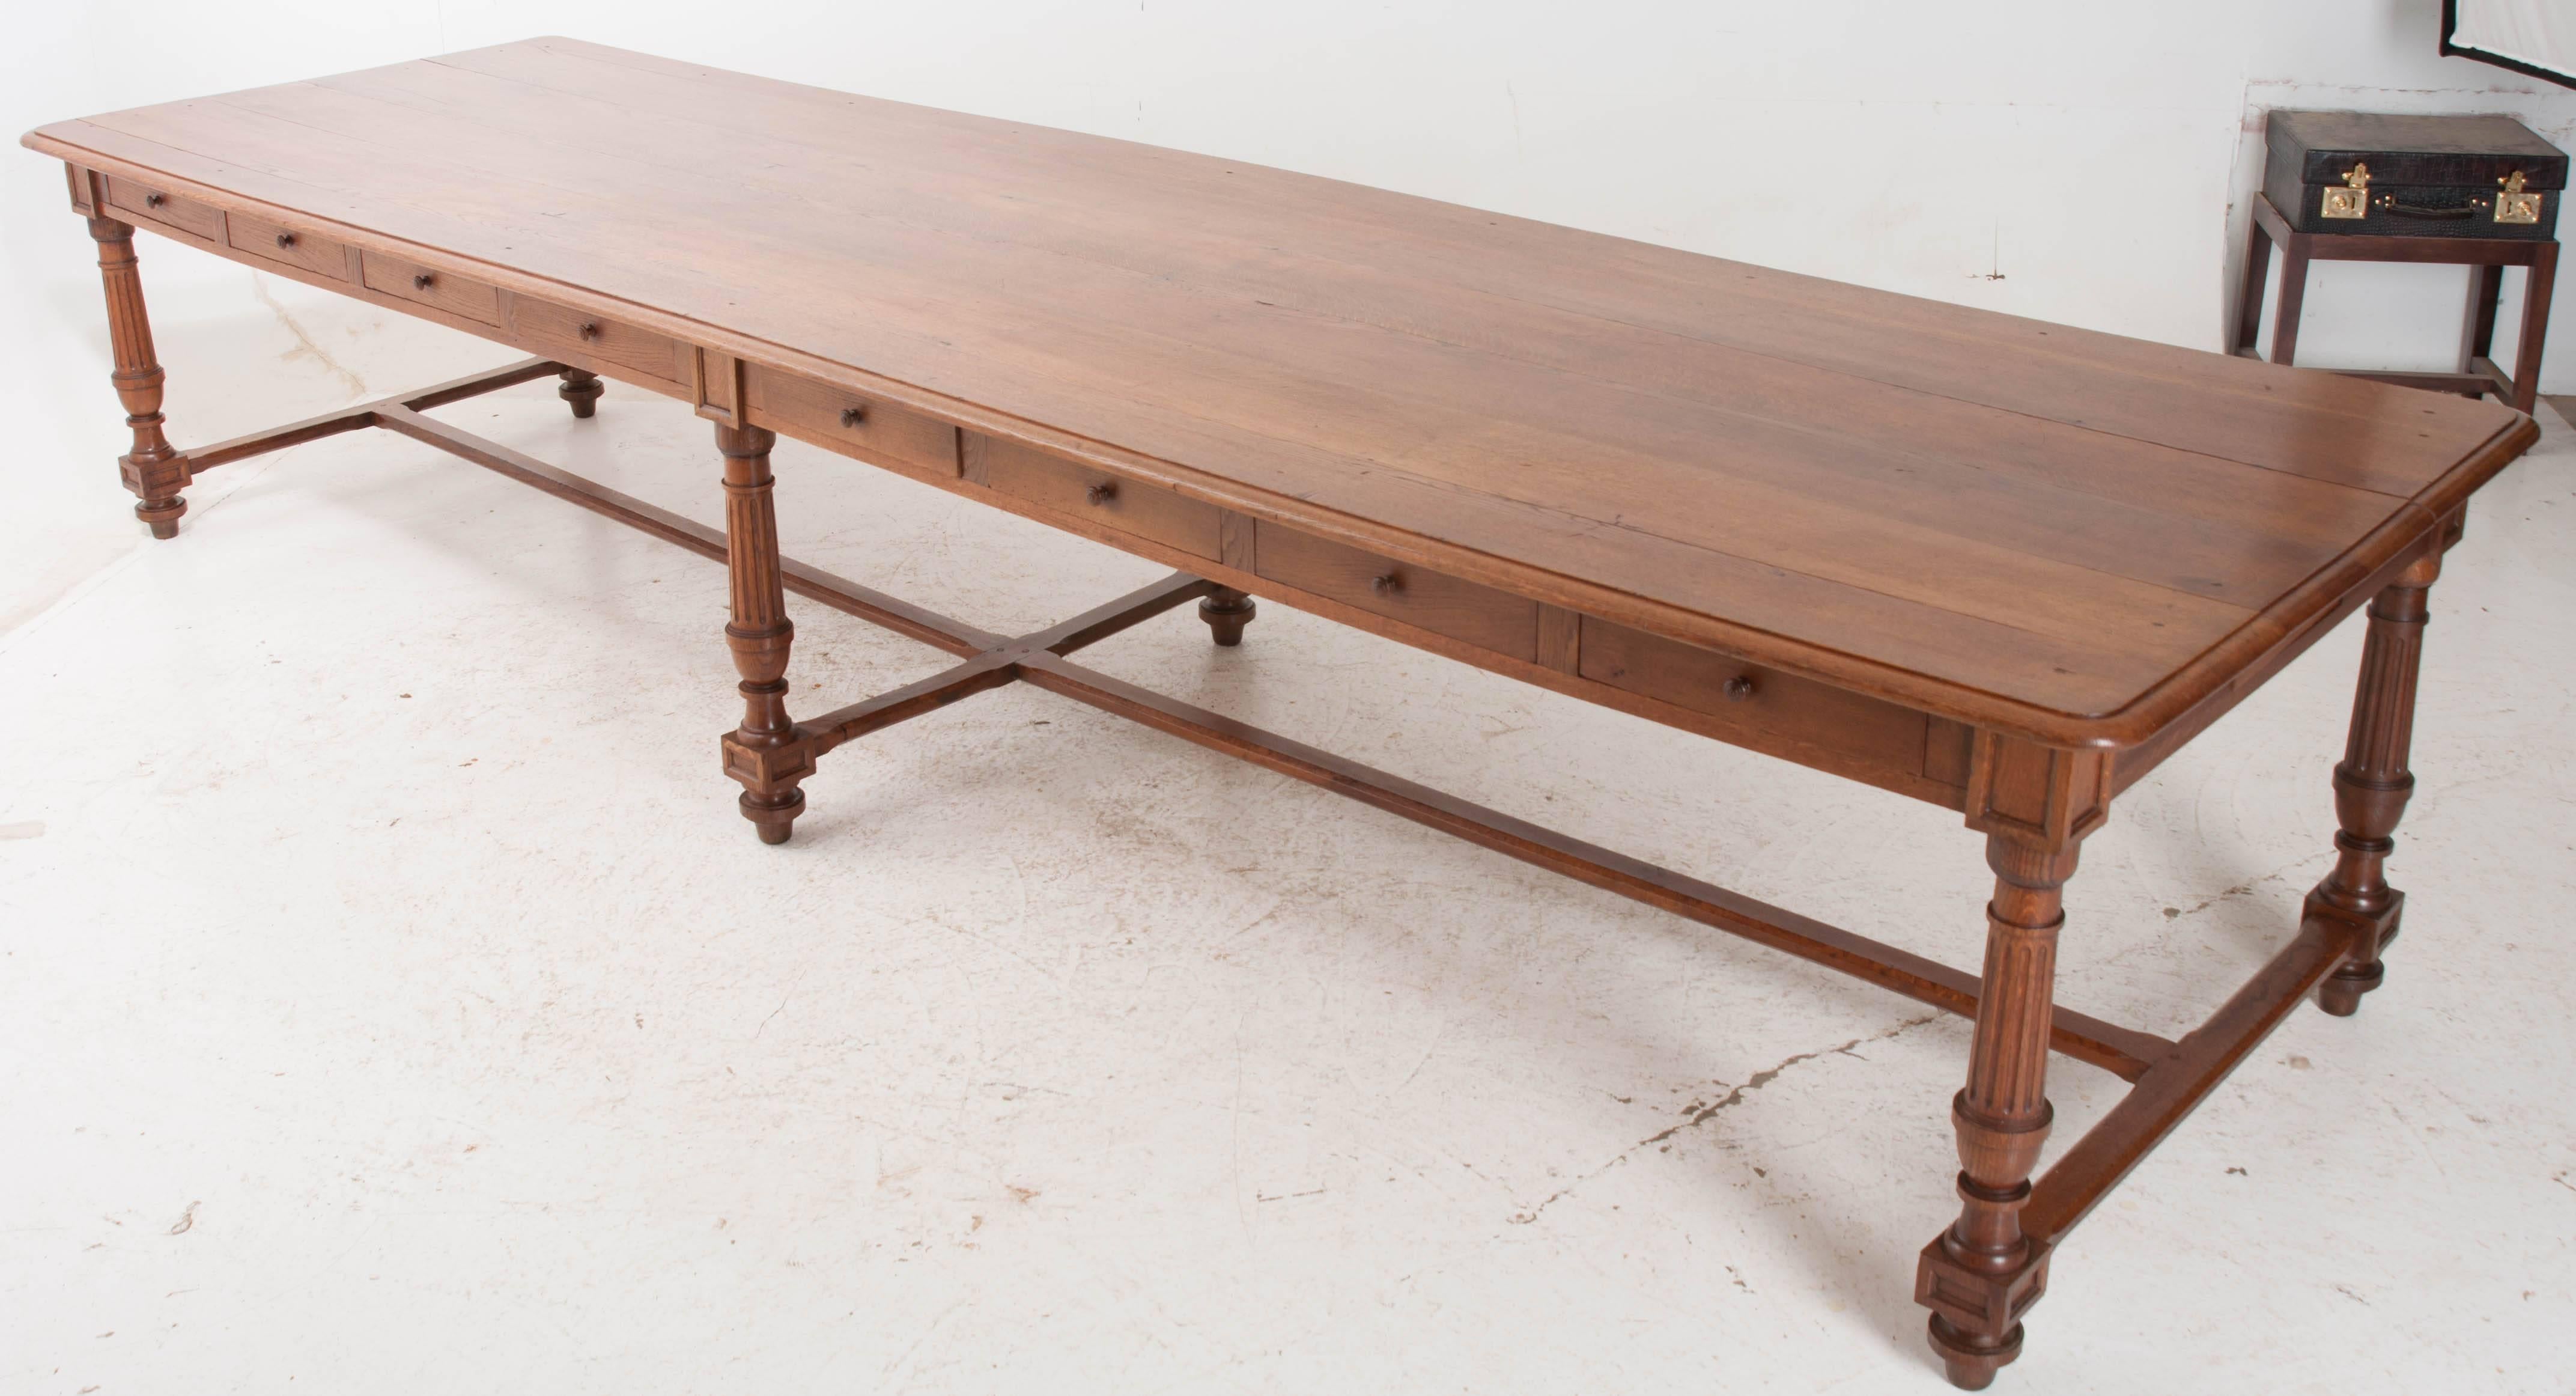 This absolutely stunning long table was originally used as a communal dining table at a nunnery in Rouen, France. This exceptional oak dining table has eighteen drawers found in the apron. With sharing and communal living being at the center of life